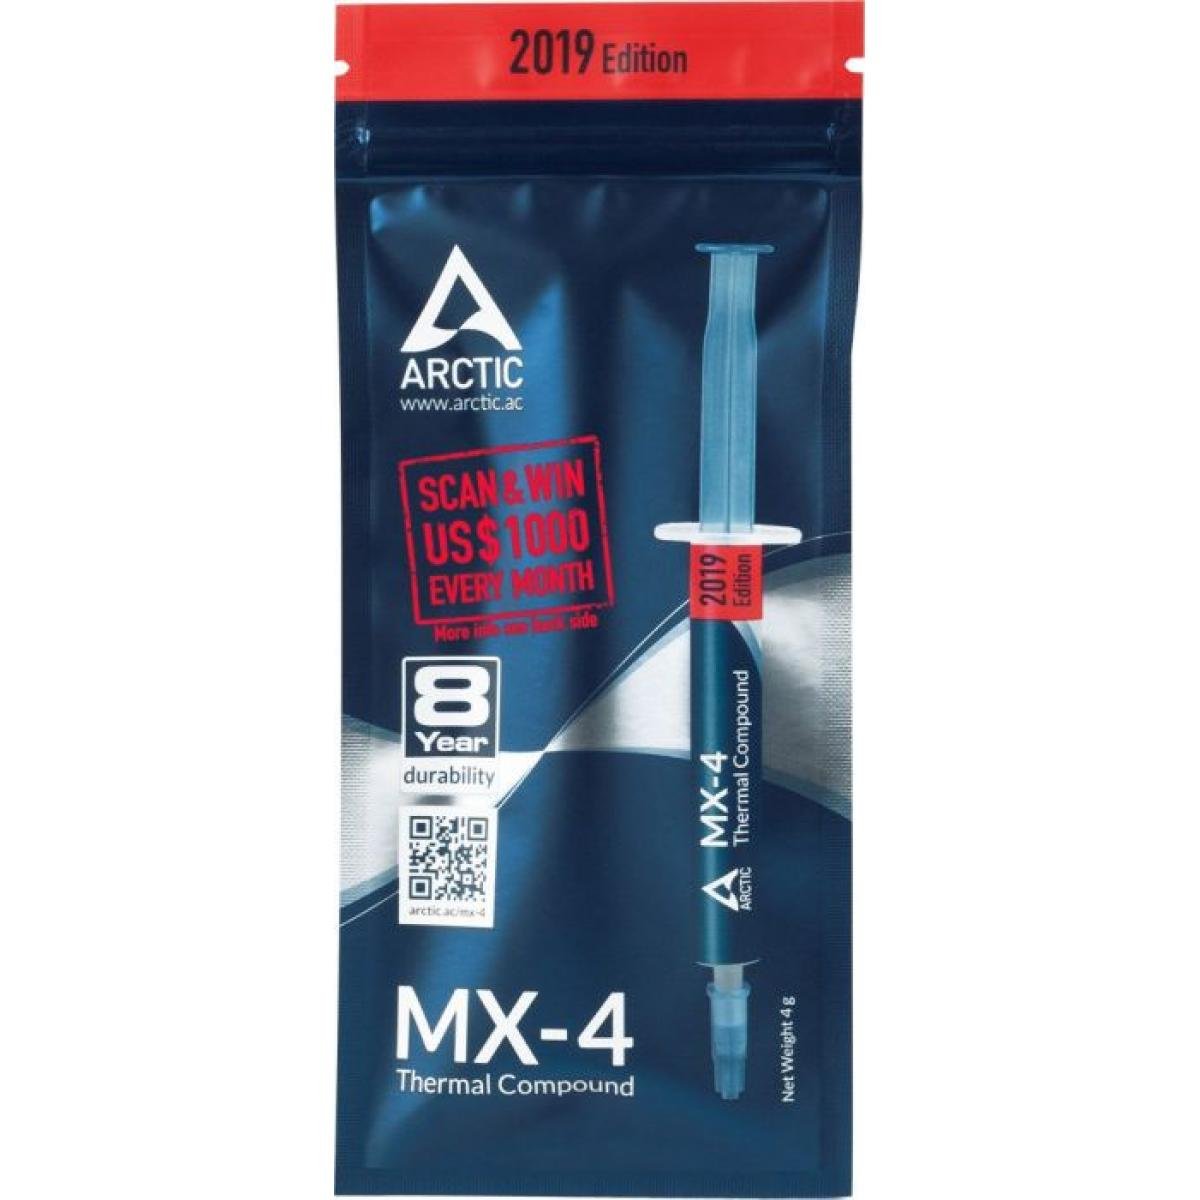 ARCTIC MX-4 2019 EDITION Thermal Compound (4.0 g)